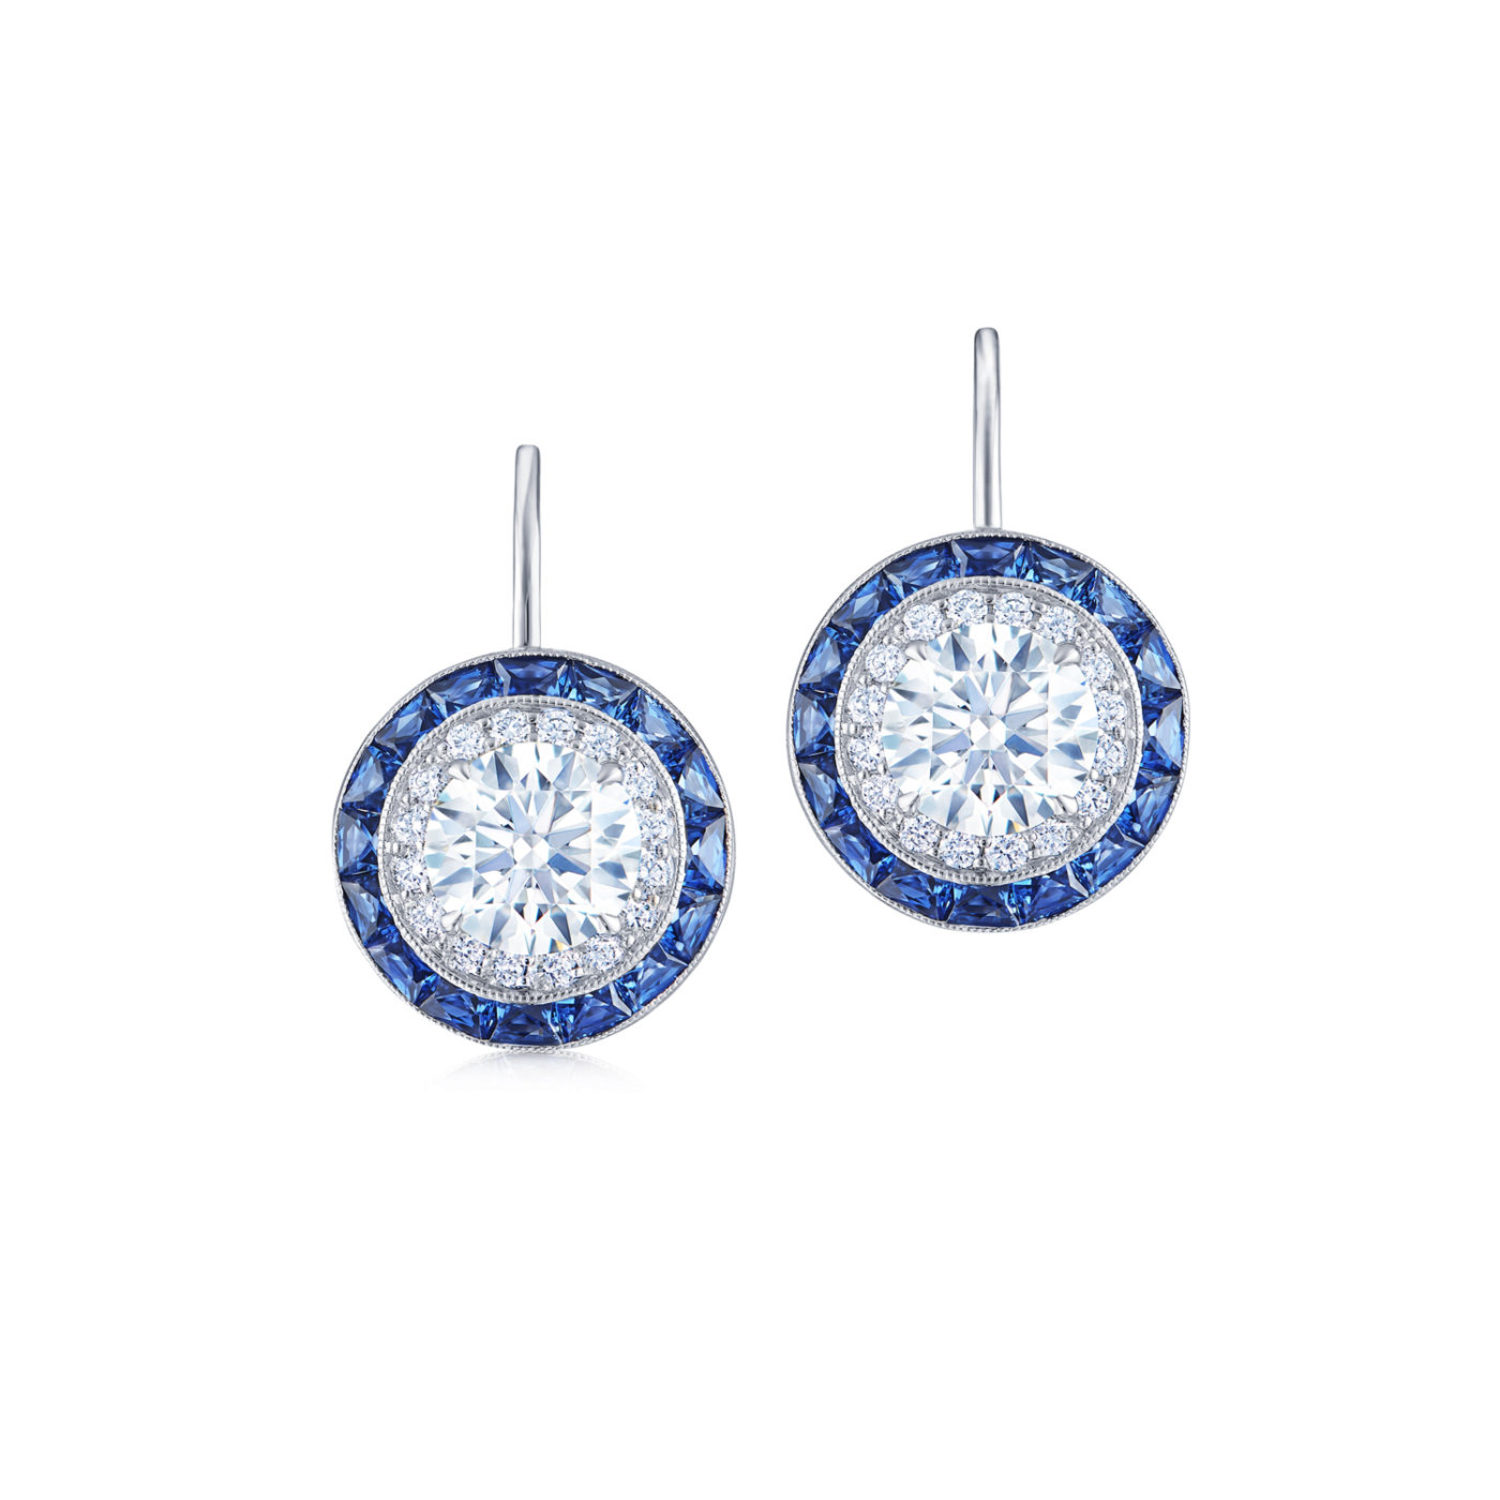 Diamond and Sapphire Silhouette Drop Earrings in 18K White Gold